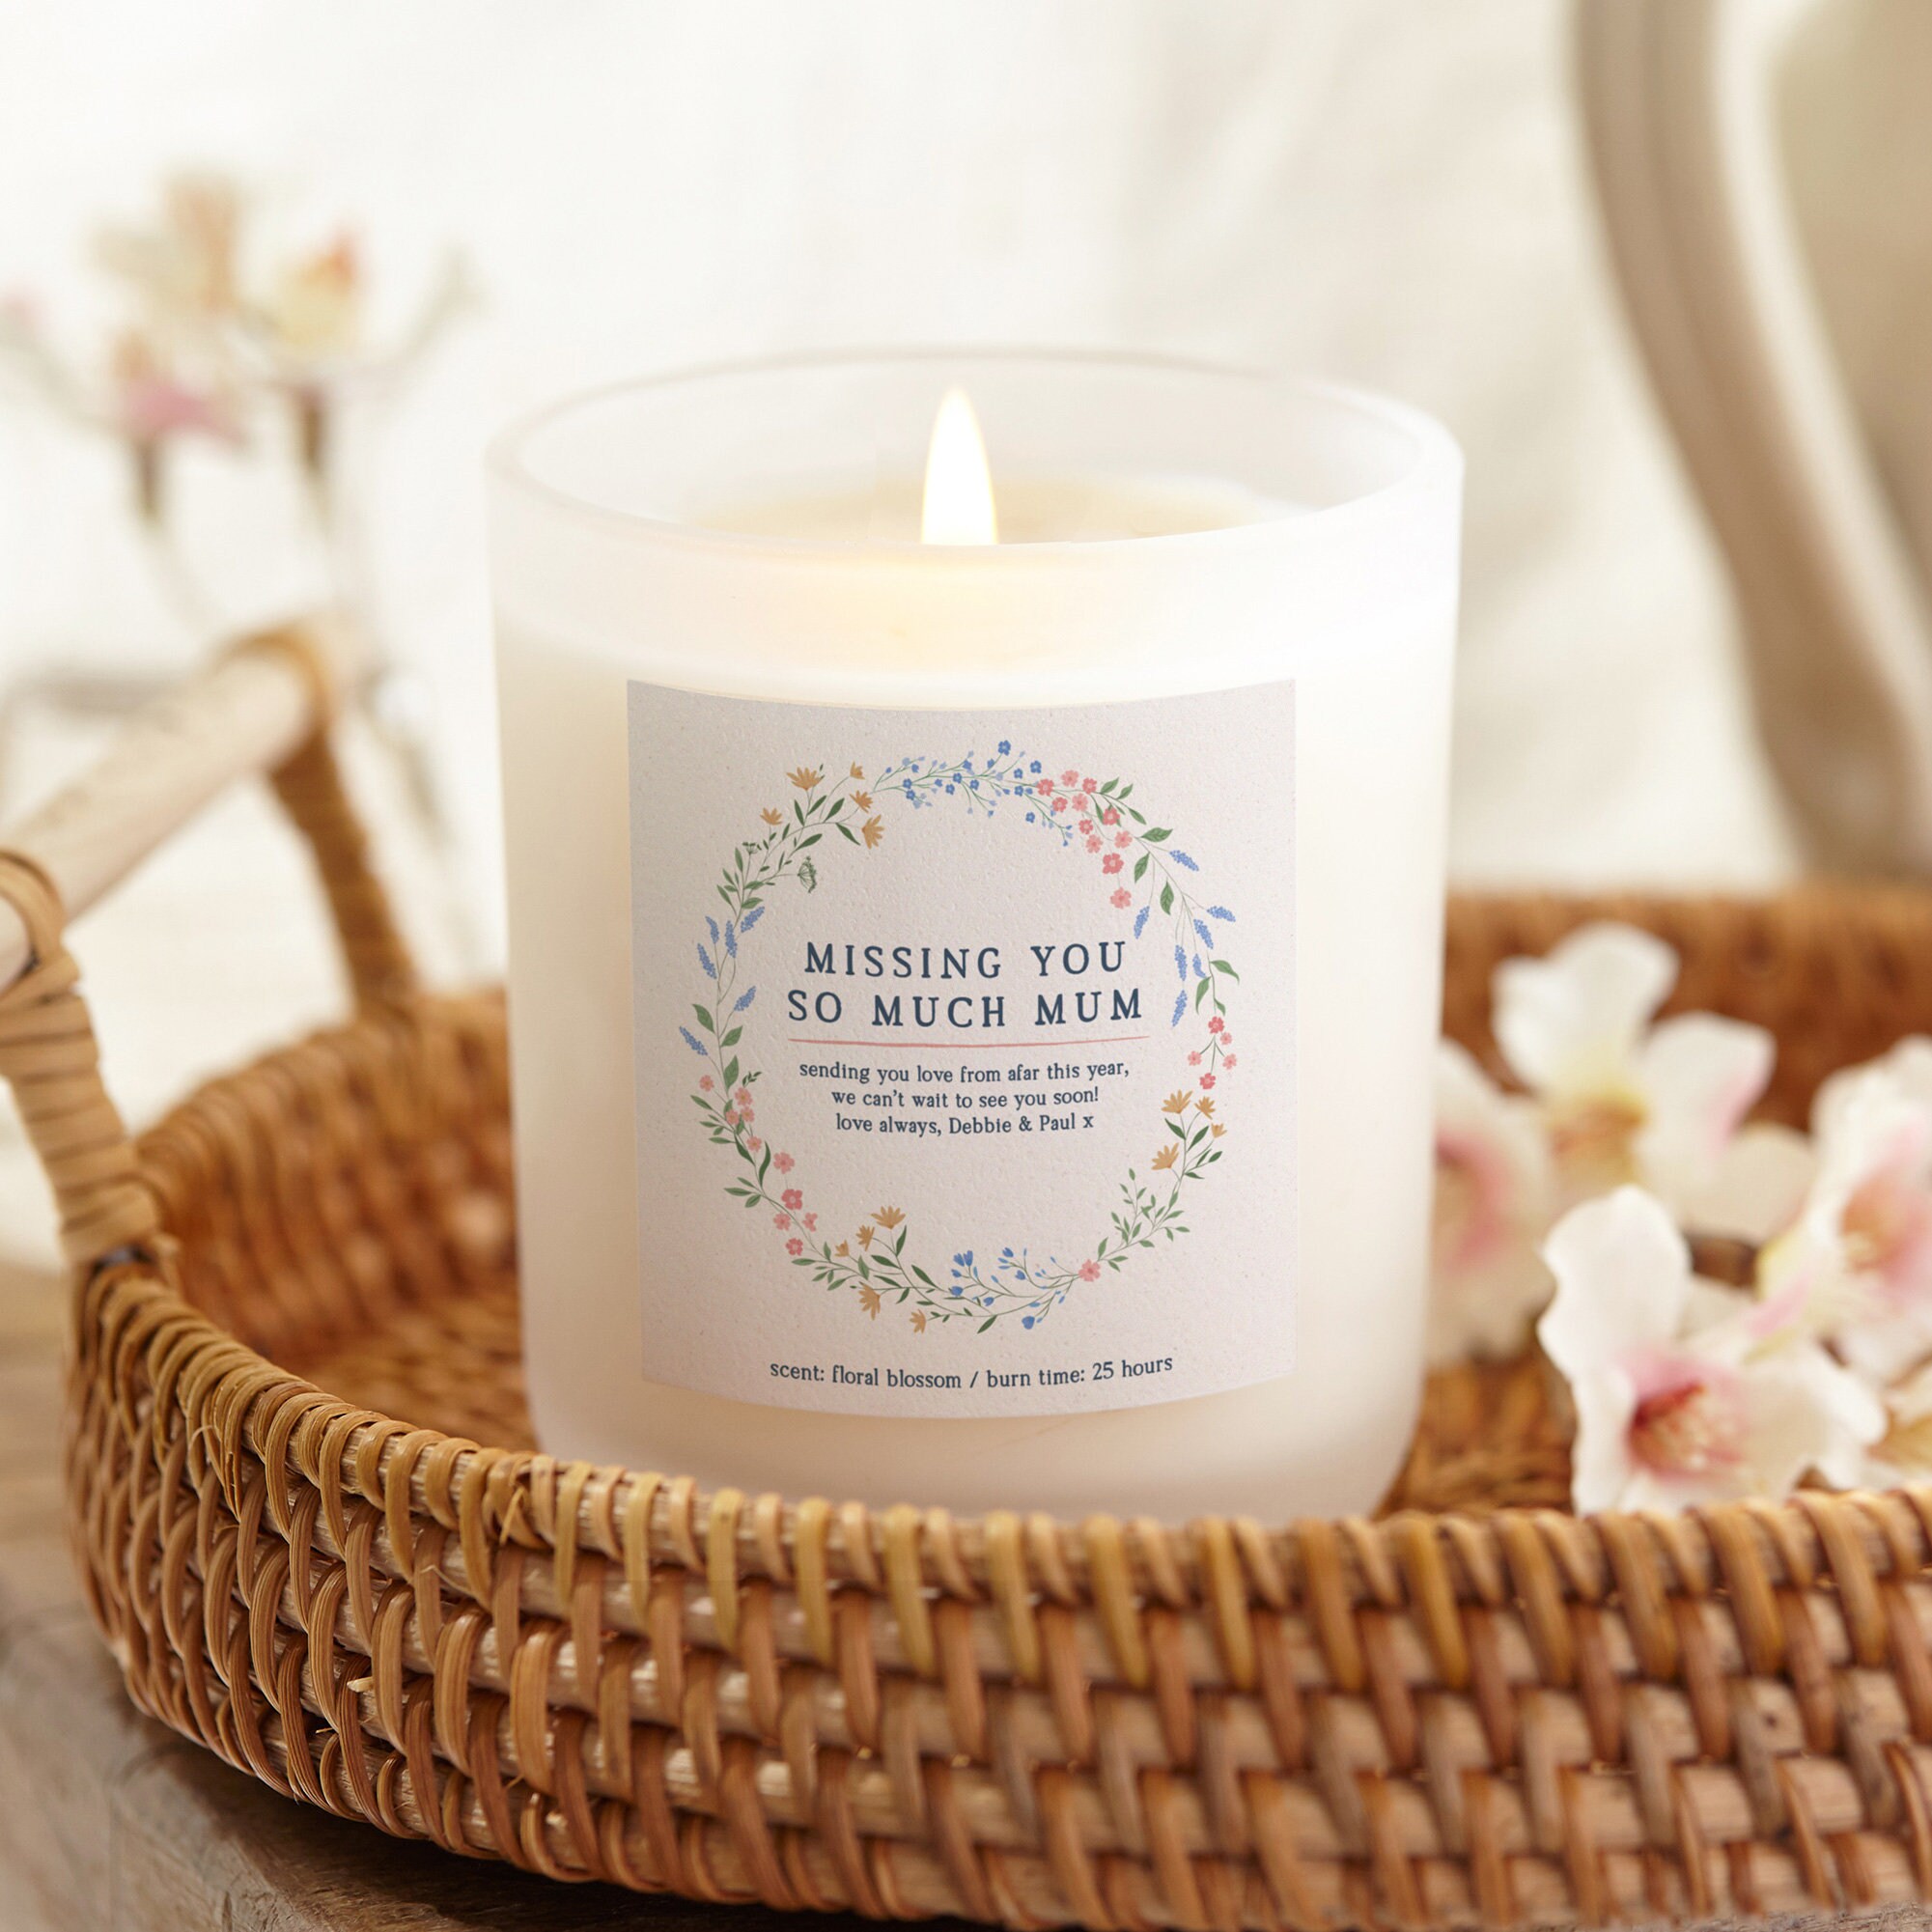 Best Selling Candle Scents - Memory Box Candle Co.